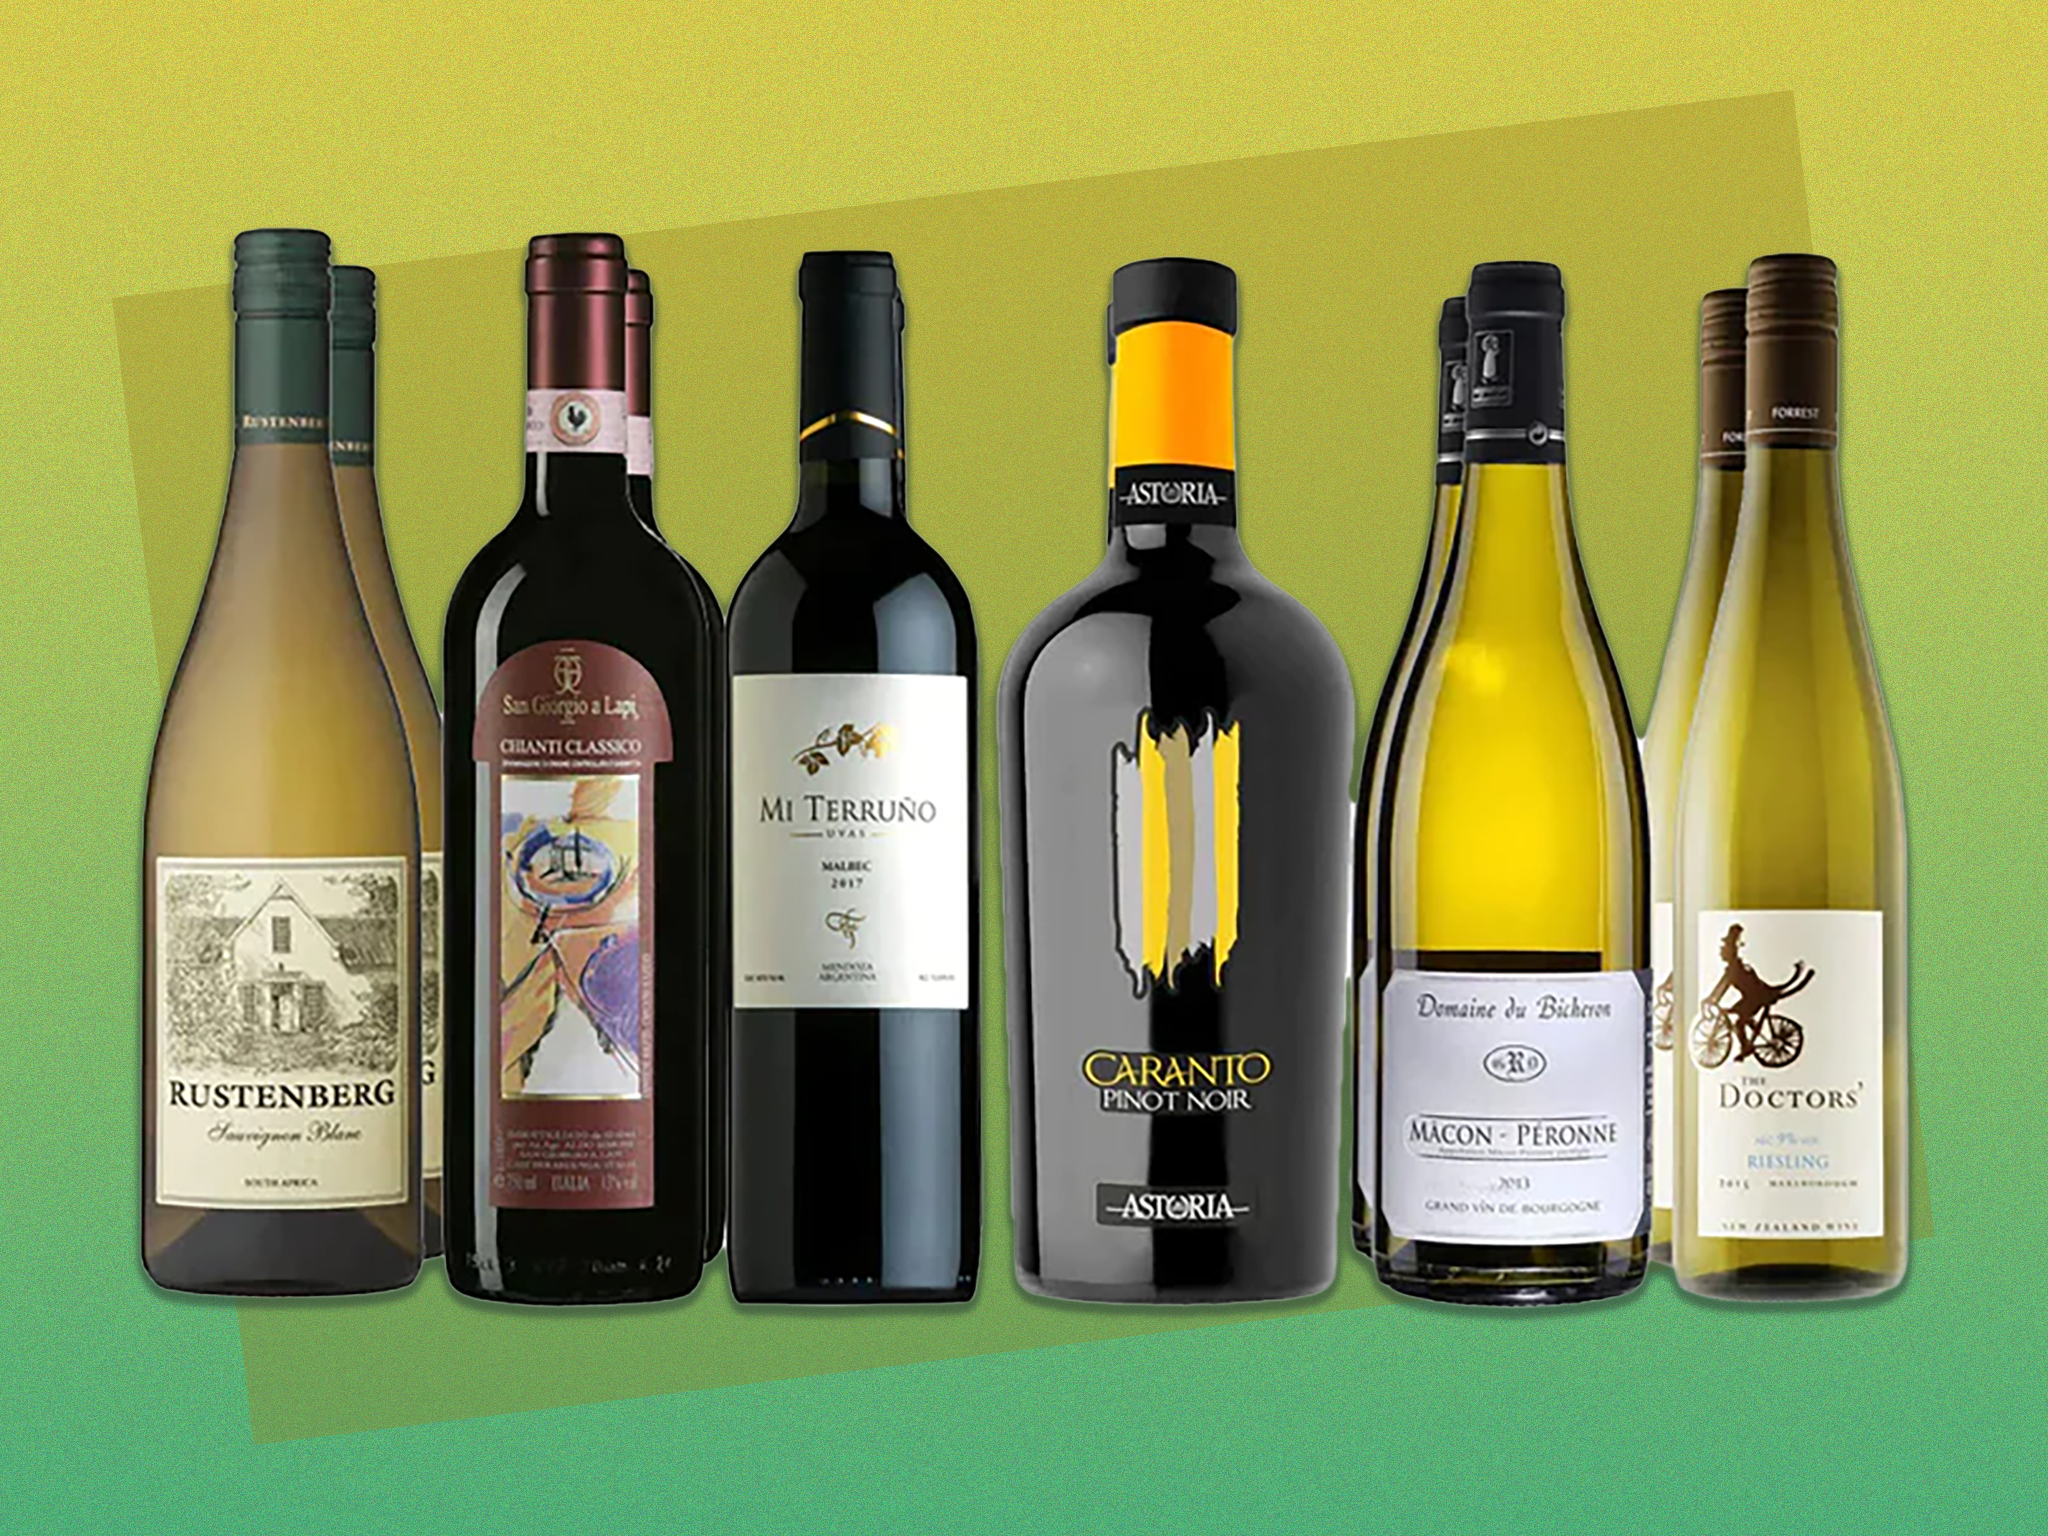 This selection of vino will work with a wide variety of food